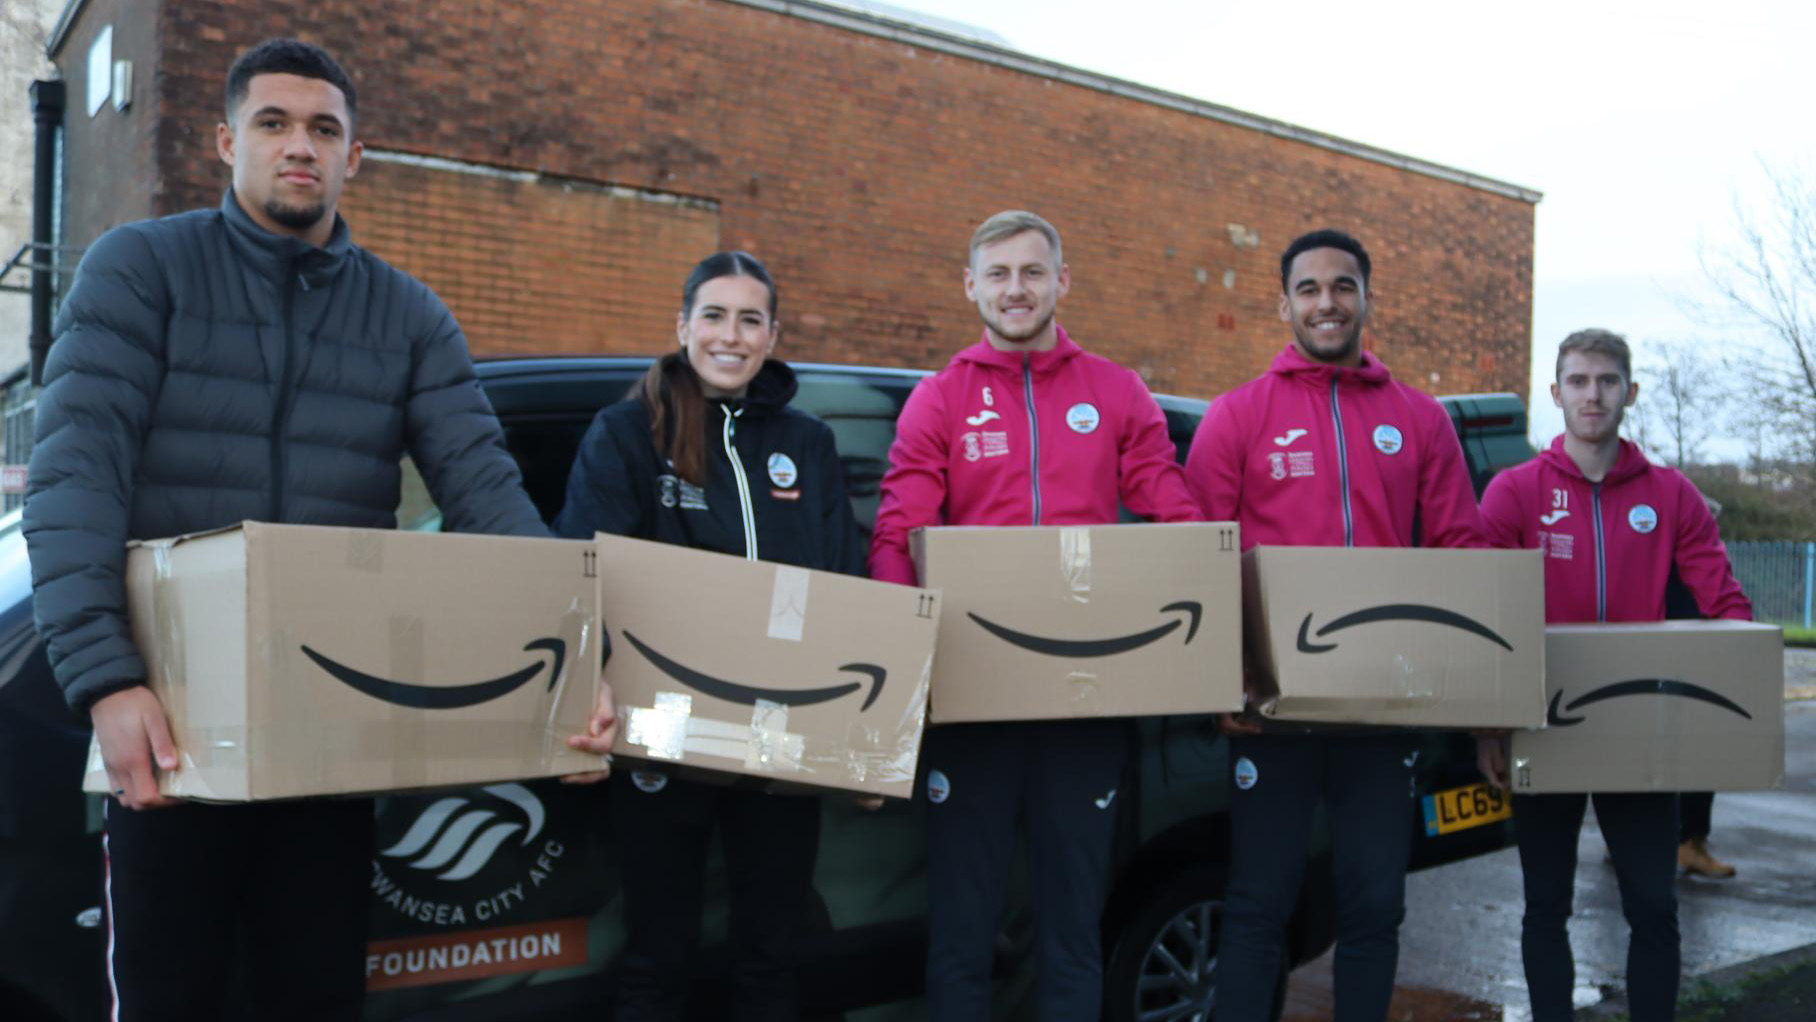 Nathan Wood, Katy Hosford, Harry Darling, Ben Cabango and Ollie Cooper hold hampers